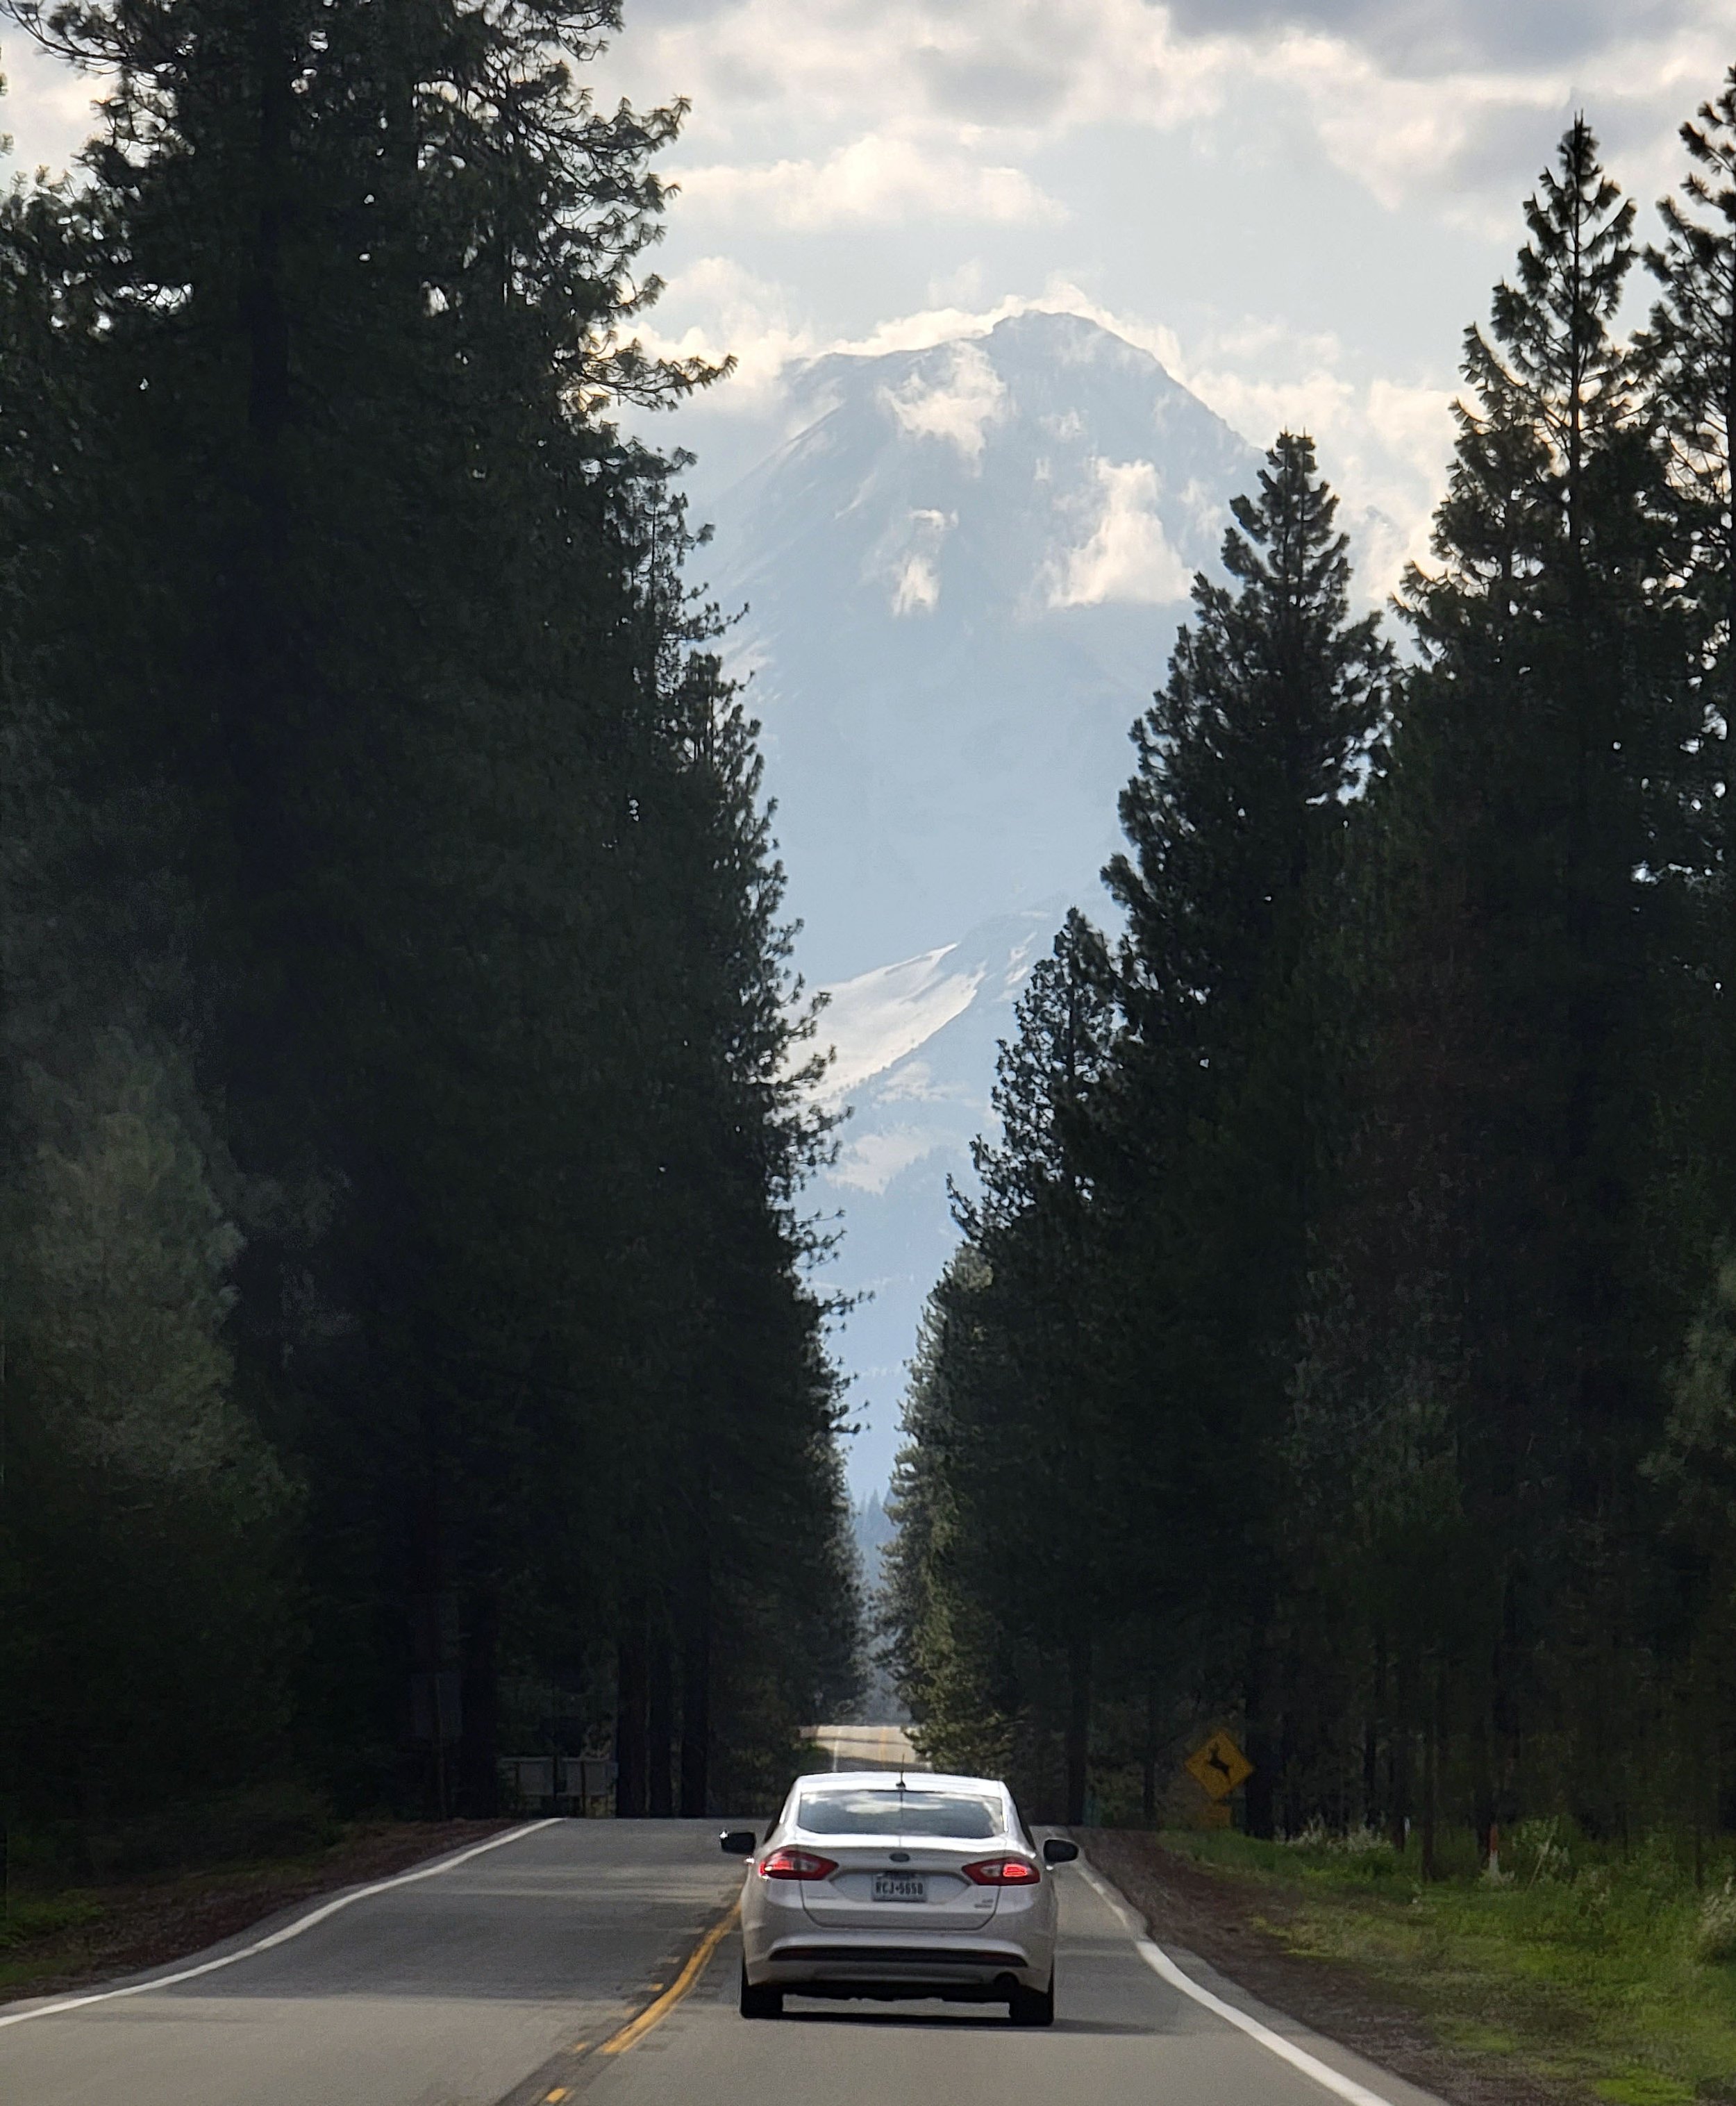 Approaching Mt. Shasta. I didn't look up what it was before so I was pretty impressed seeing this giant mountain approach.